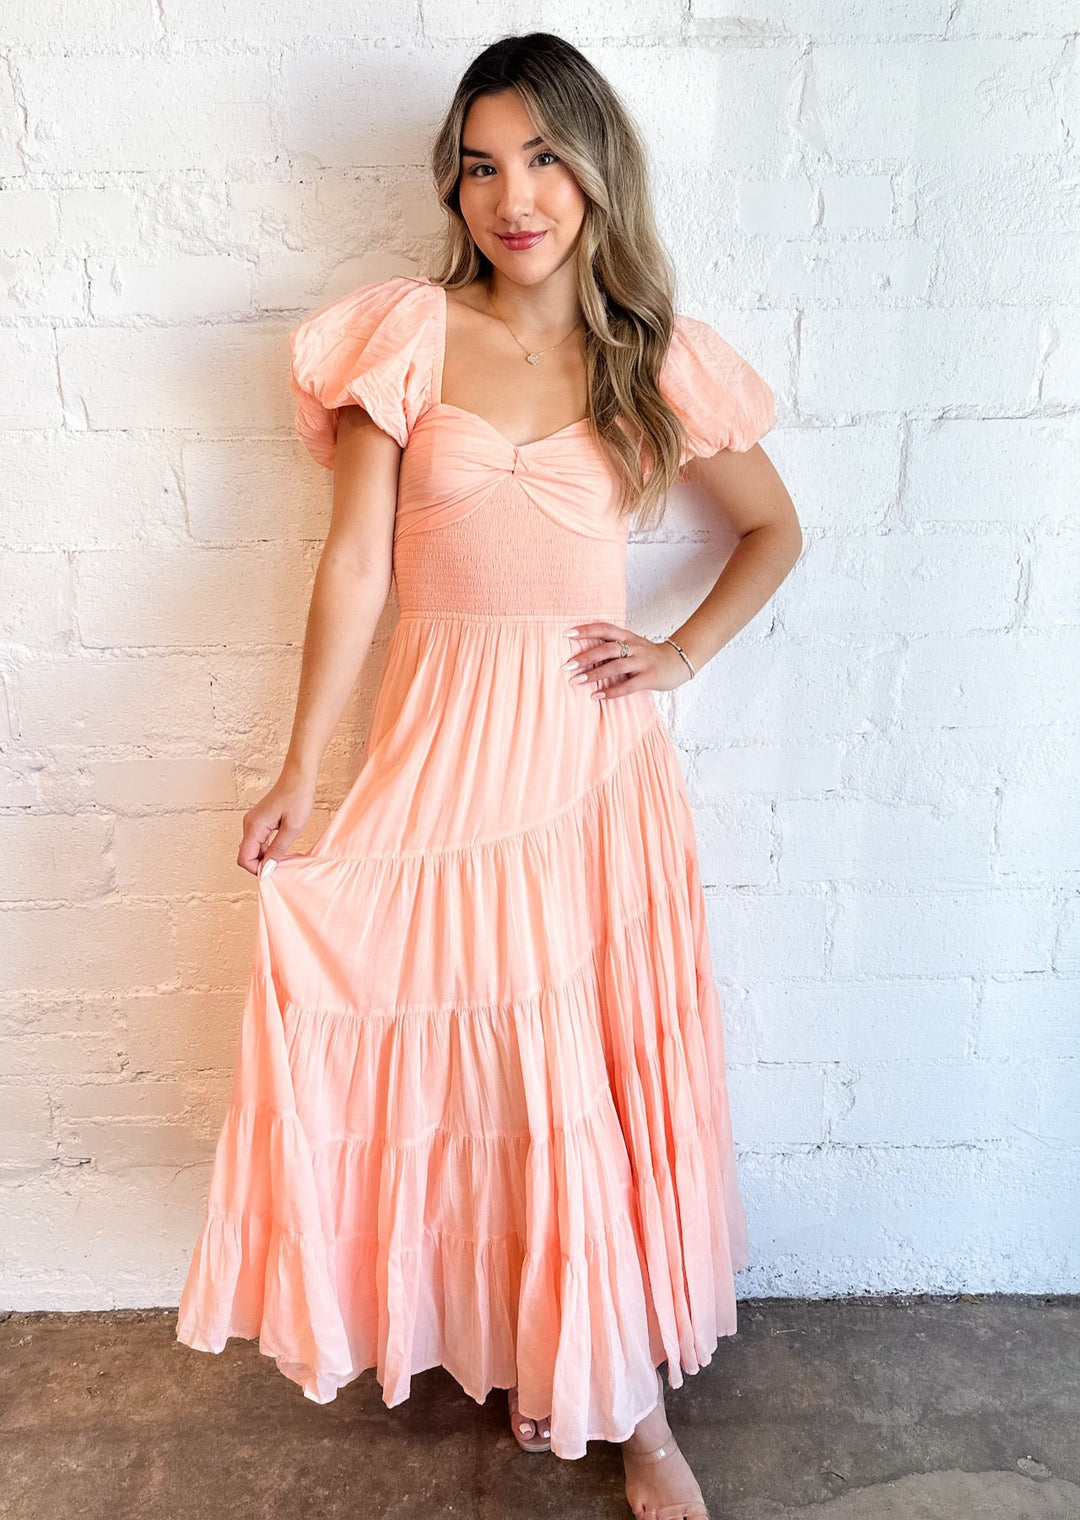 Short Sleeve Sundrenched Maxi, Dresses, Free People, Adeline, dallas boutique, dallas texas, texas boutique, women's boutique dallas, adeline boutique, dallas boutique, trendy boutique, affordable boutique